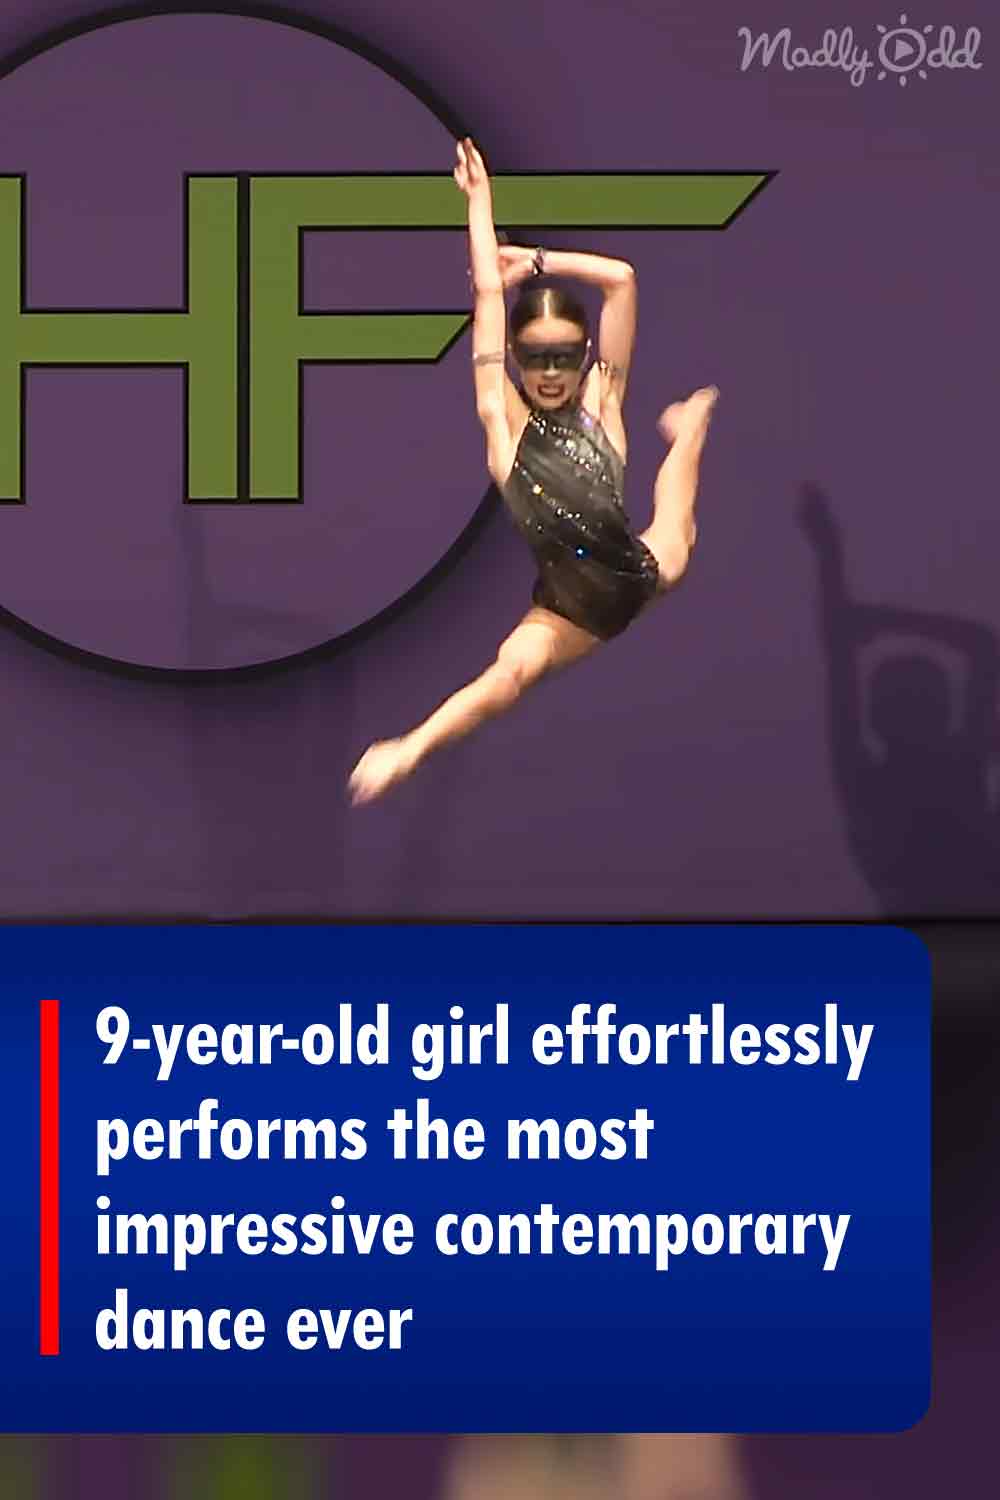 9-year-old girl effortlessly performs the most impressive contemporary dance ever